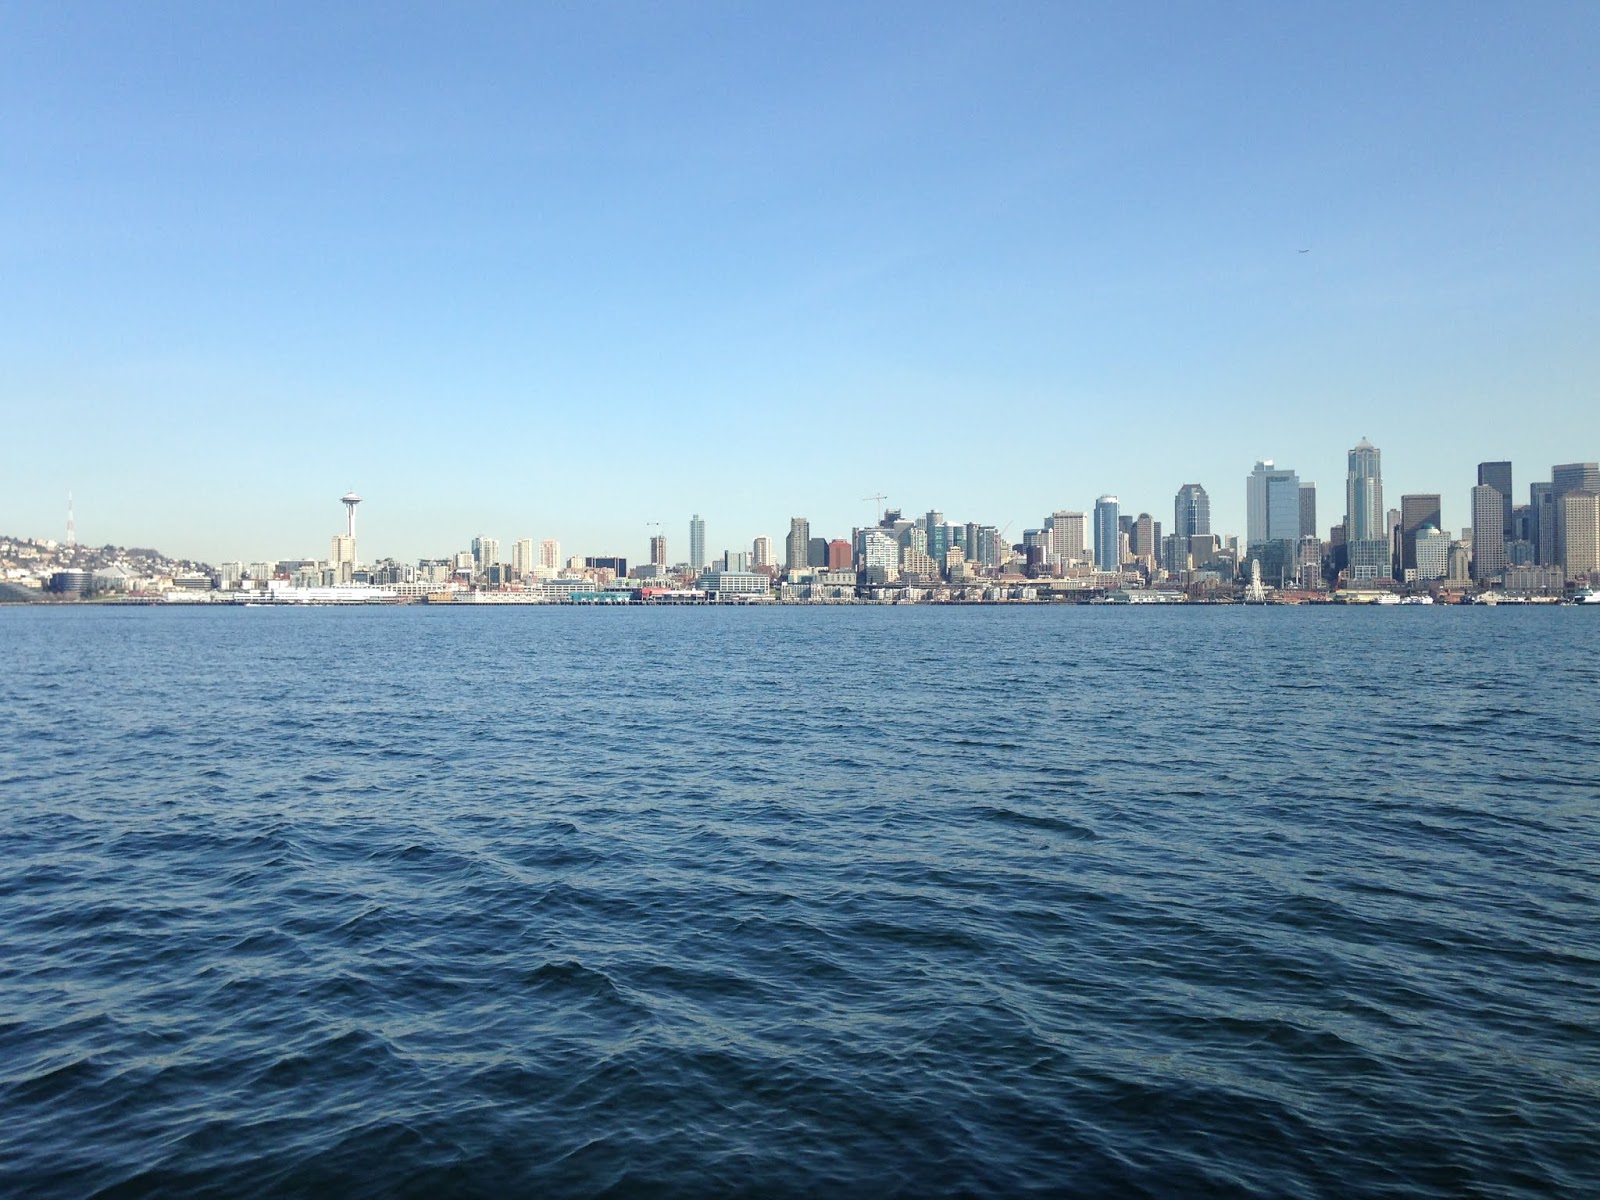 Puget Sound and Seattle, water in foreground, buildings in background